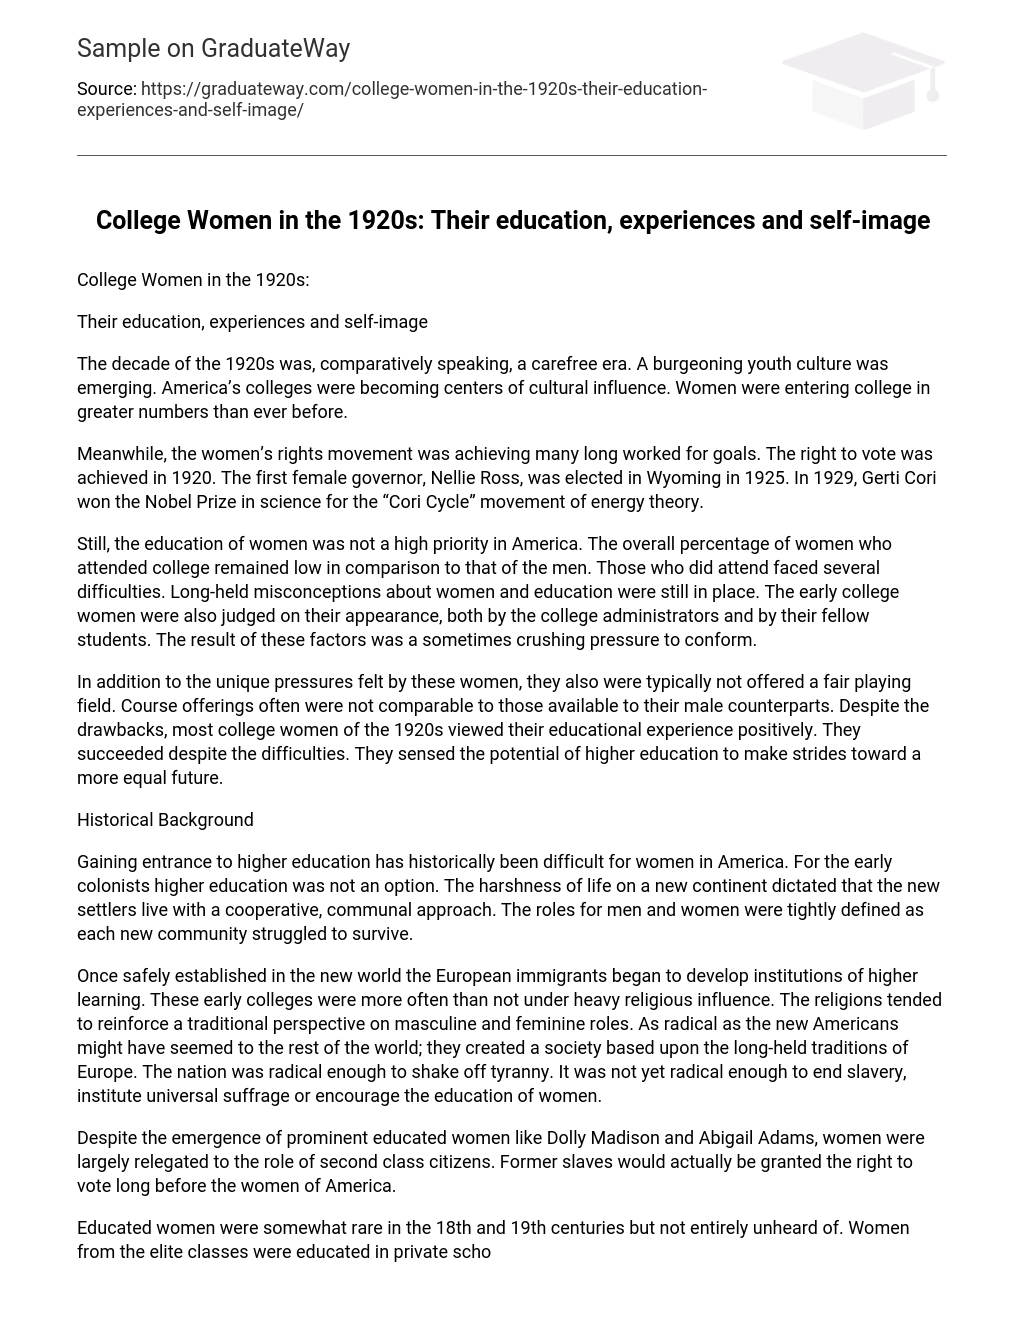 College Women in the 1920s: Their Education, Experiences and Self-Image